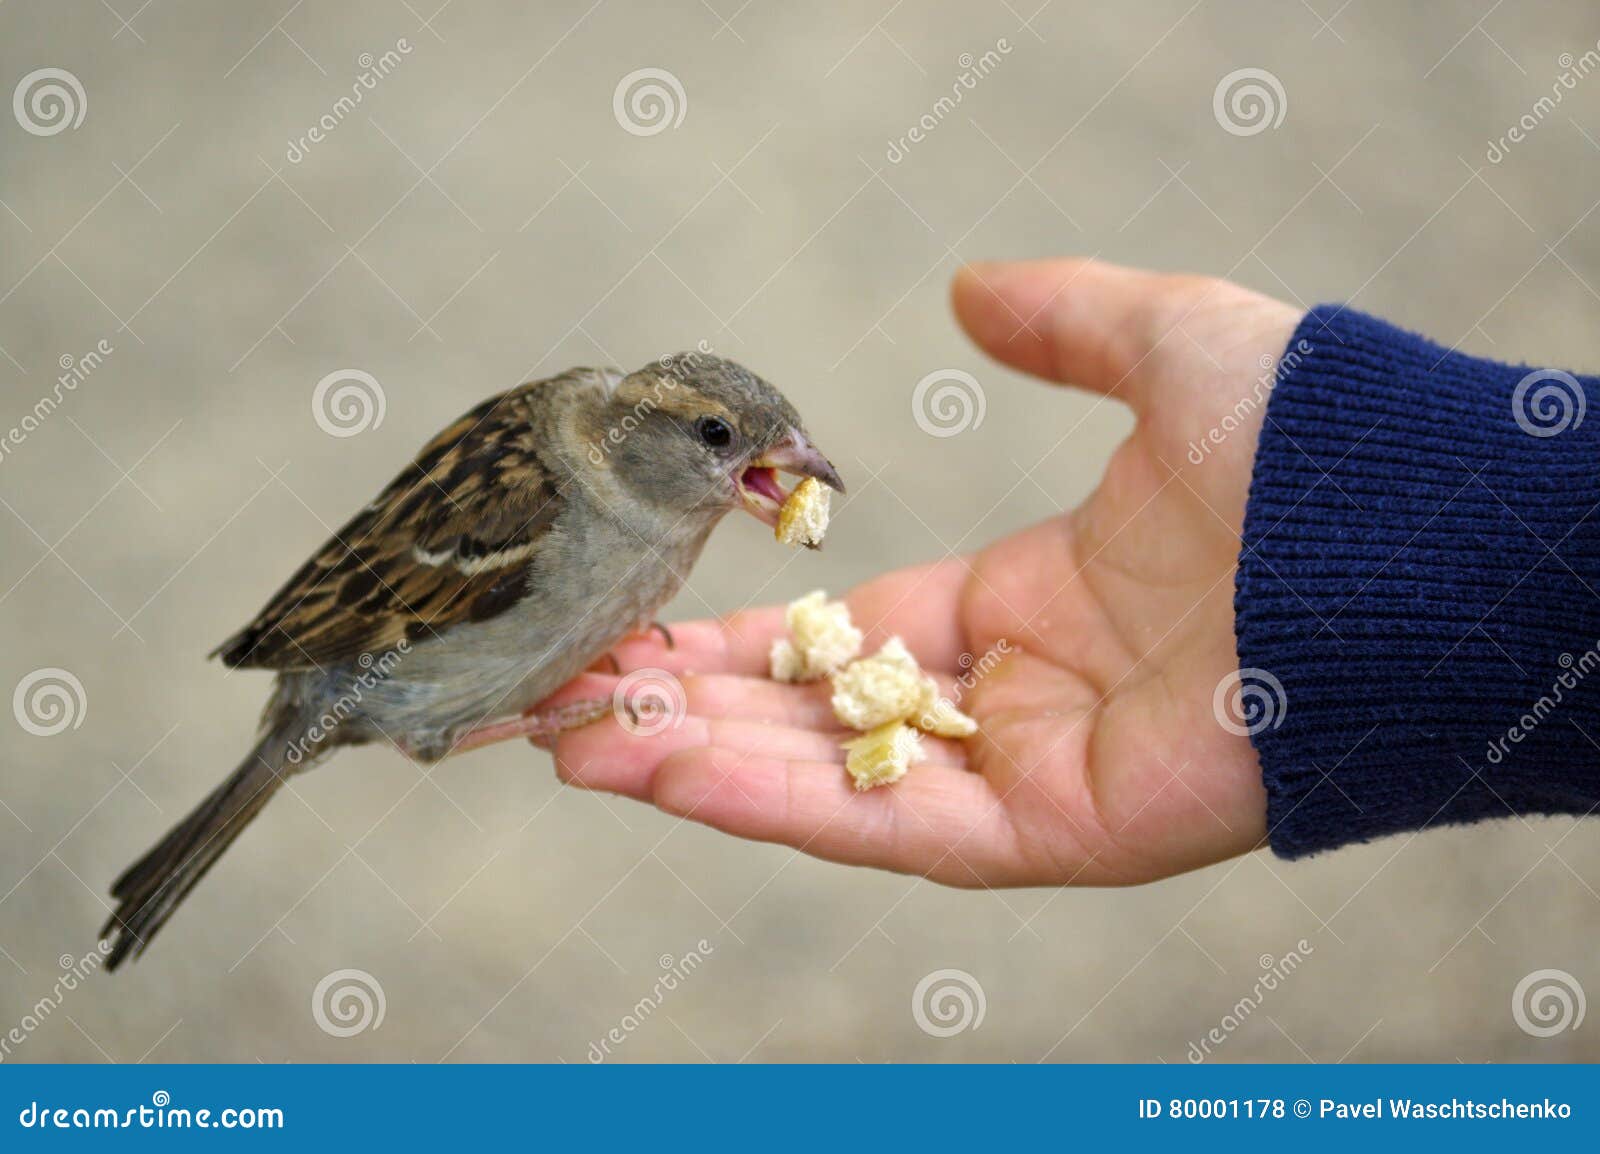 Can Baby Sparrows Eat Bread Or Other Human Foods?  